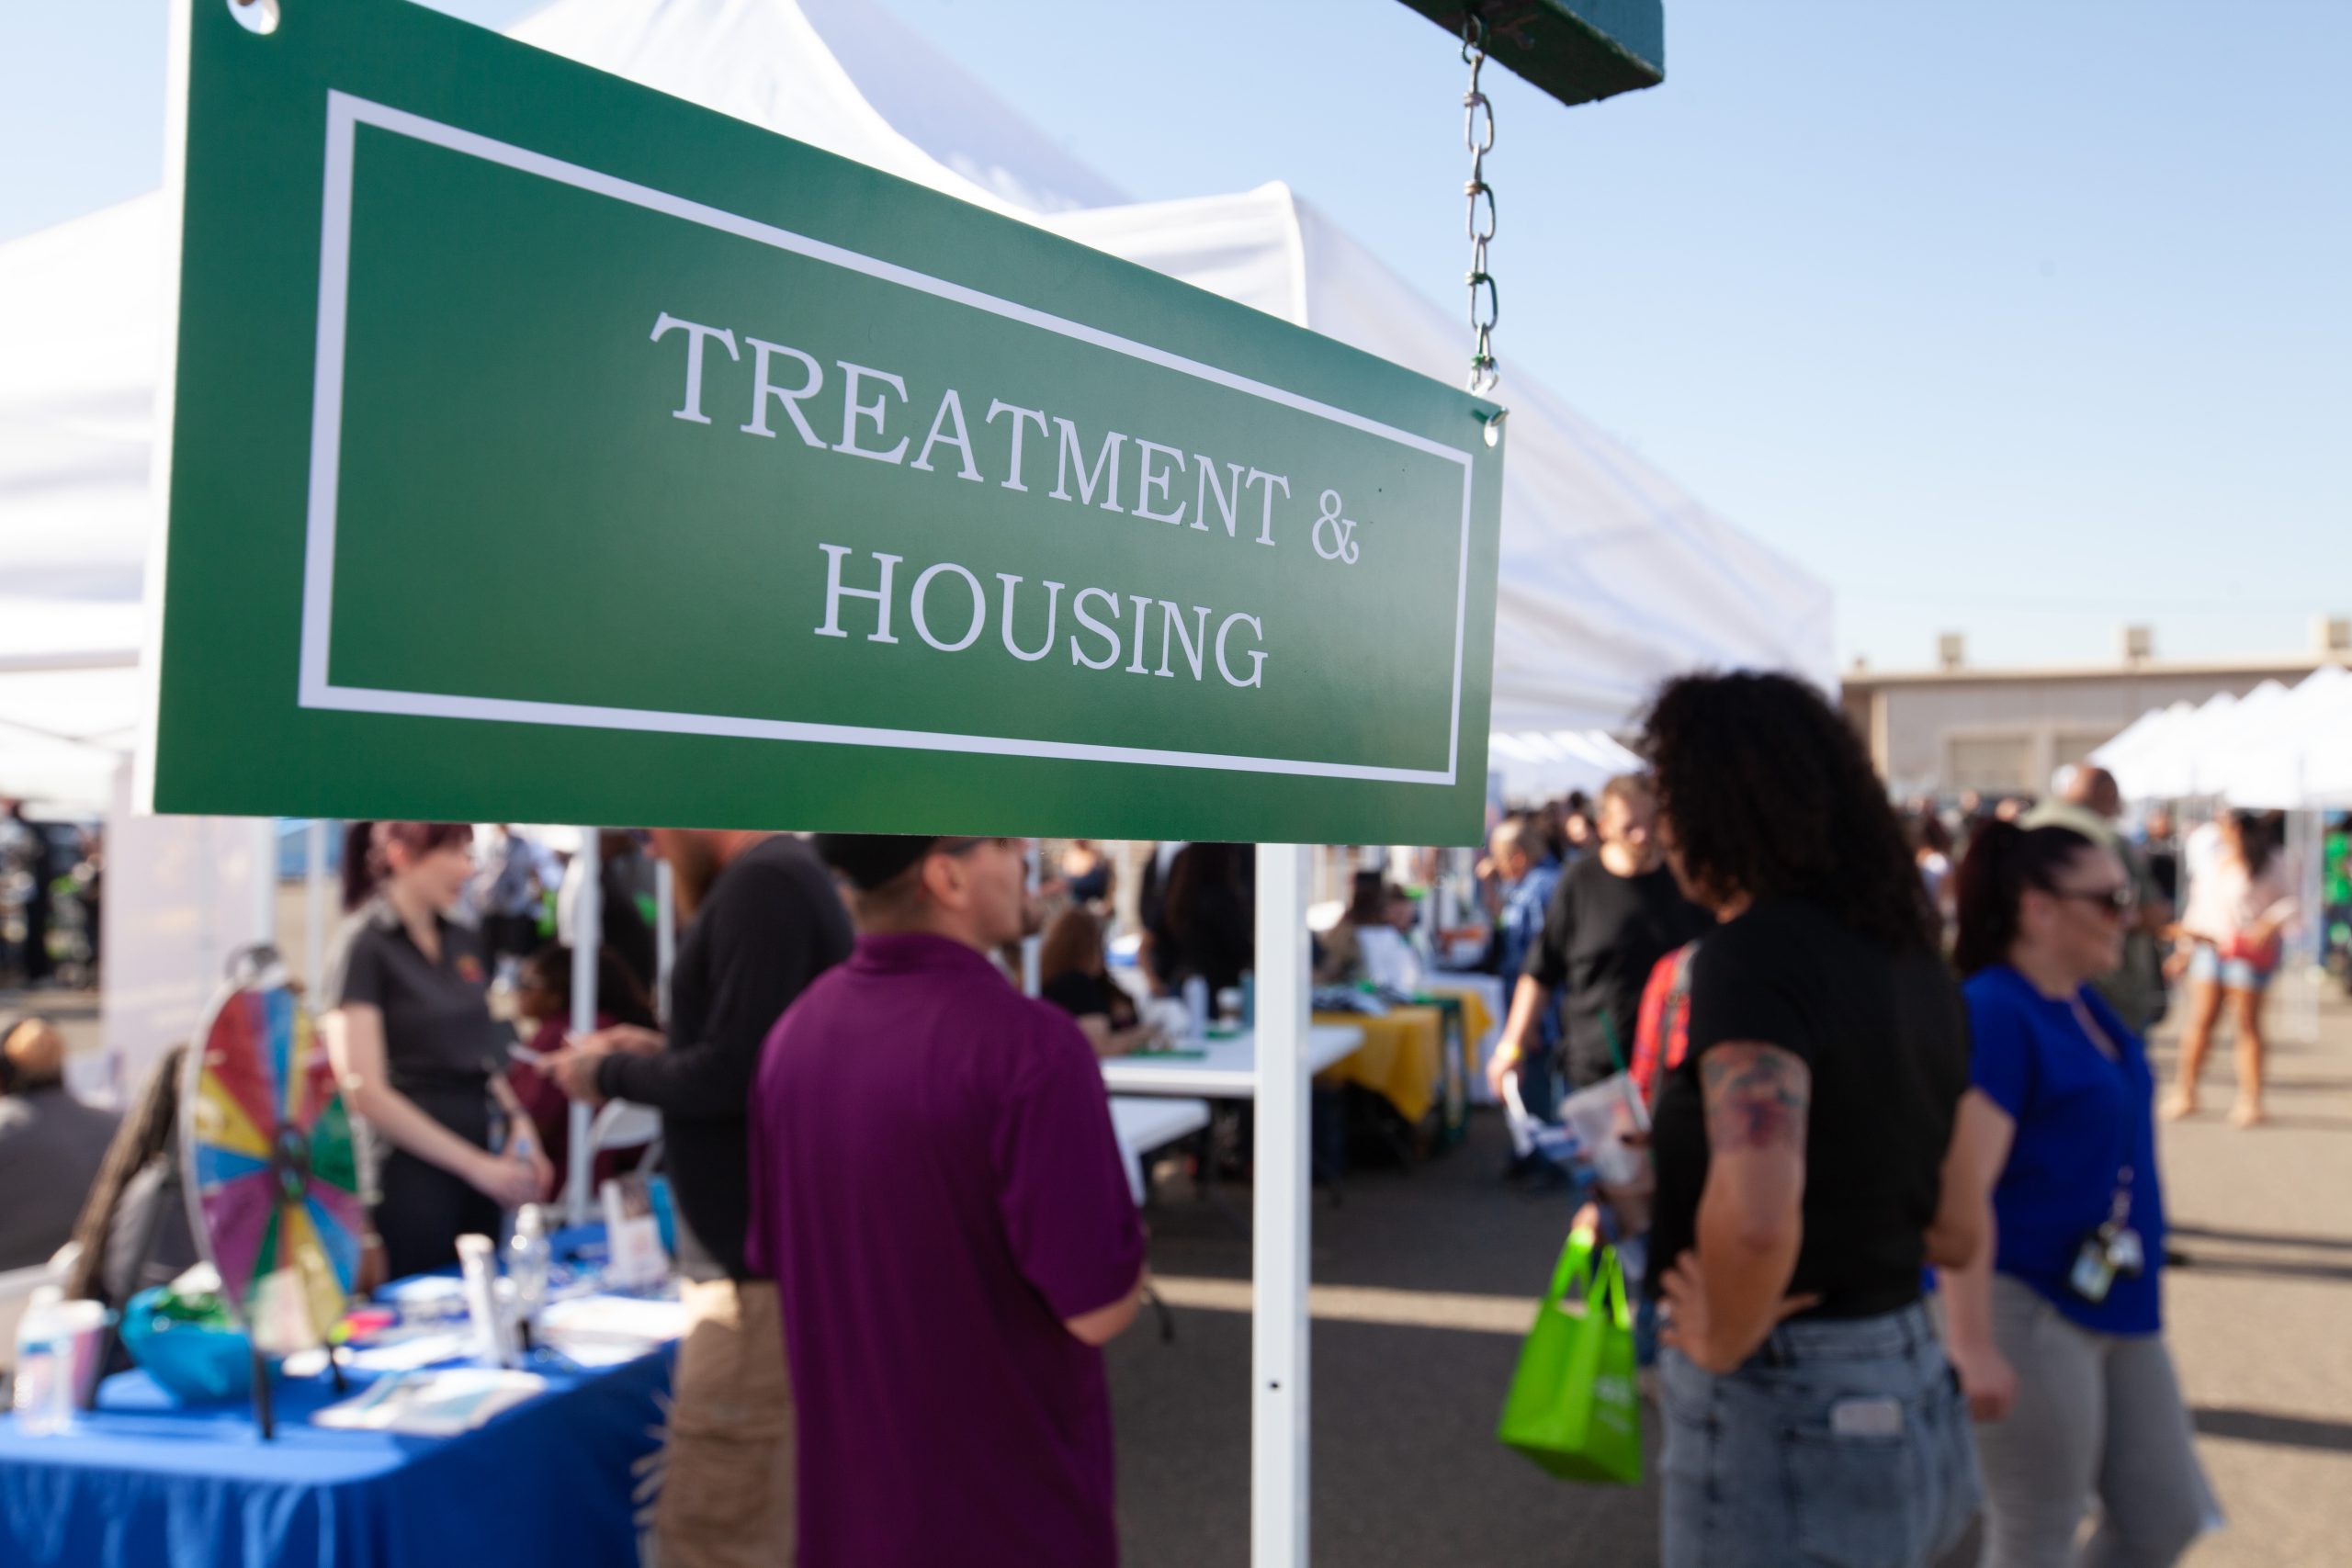 People on parole get help with "treatment and housing" according to a sign hanging from a reentry fair booth.